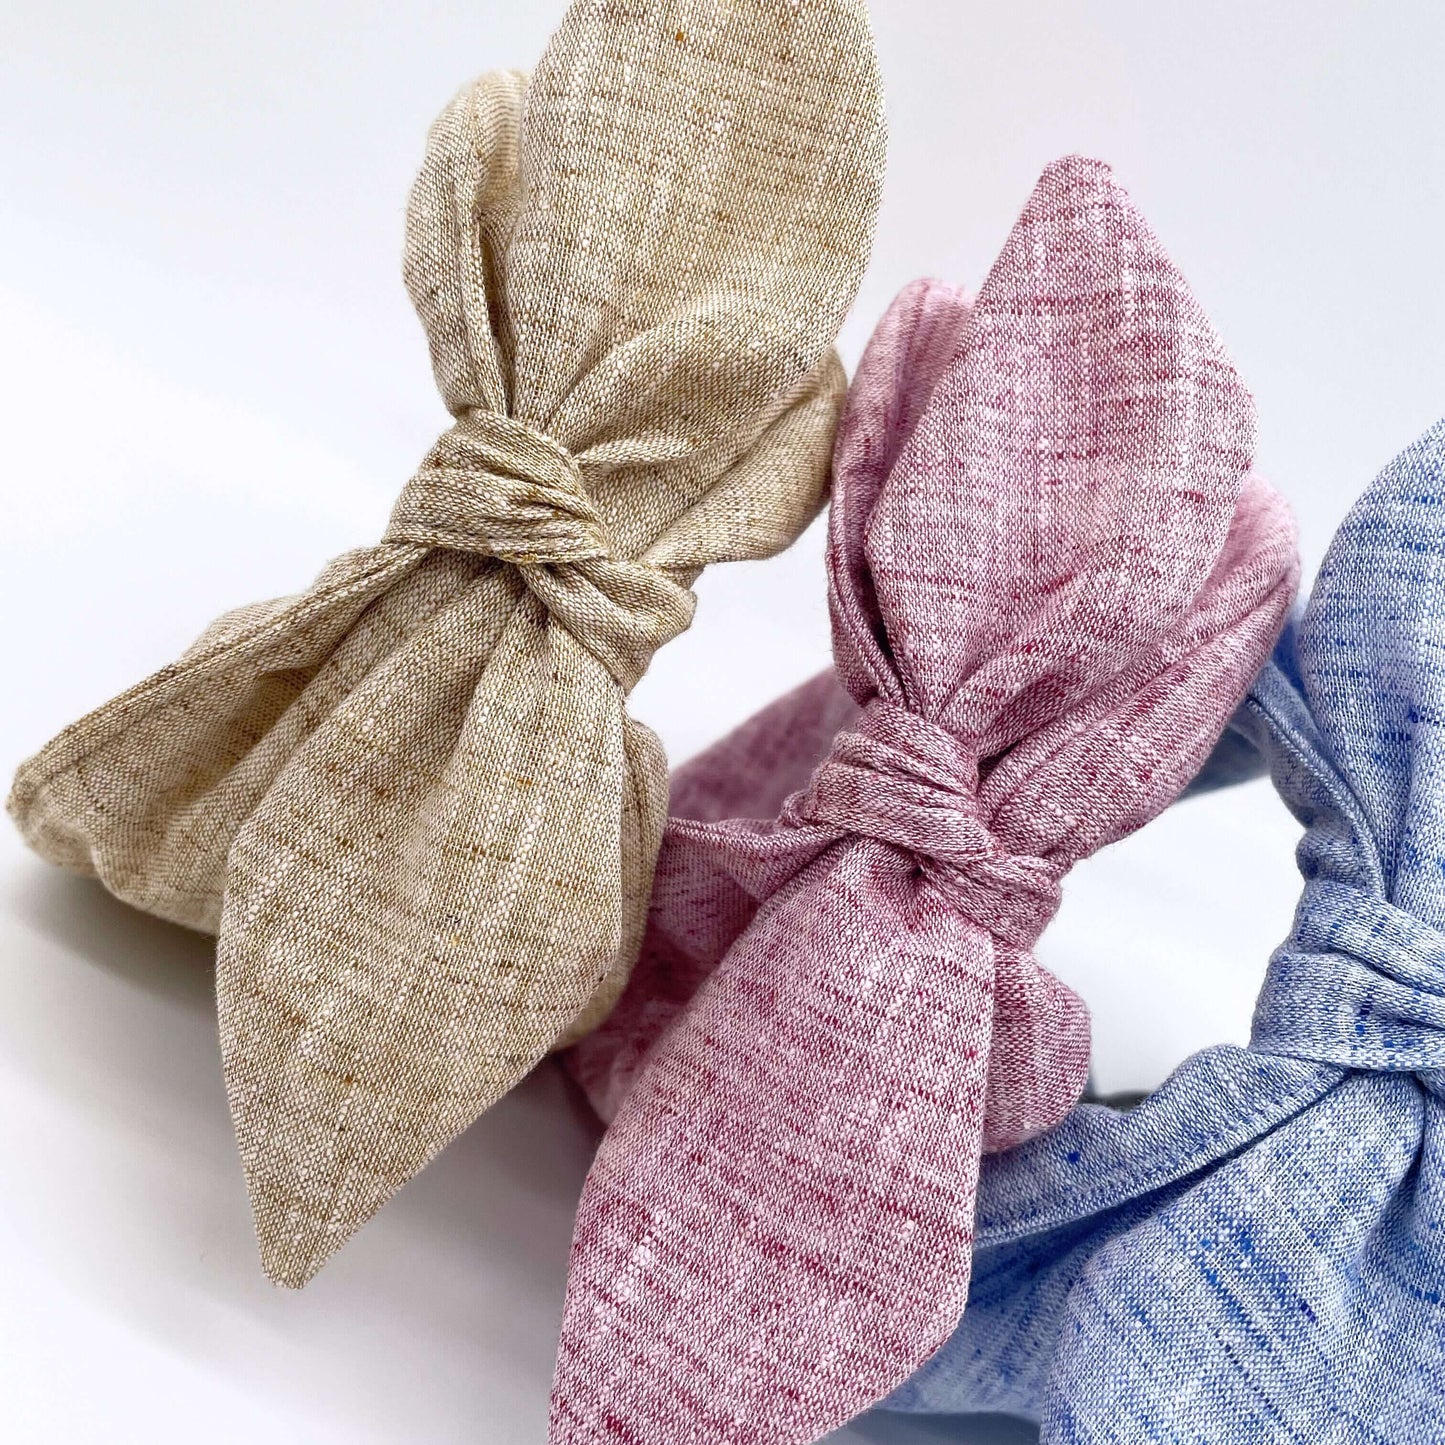 Three pretty linen fabric headbands with bows, pink, natural, blue.